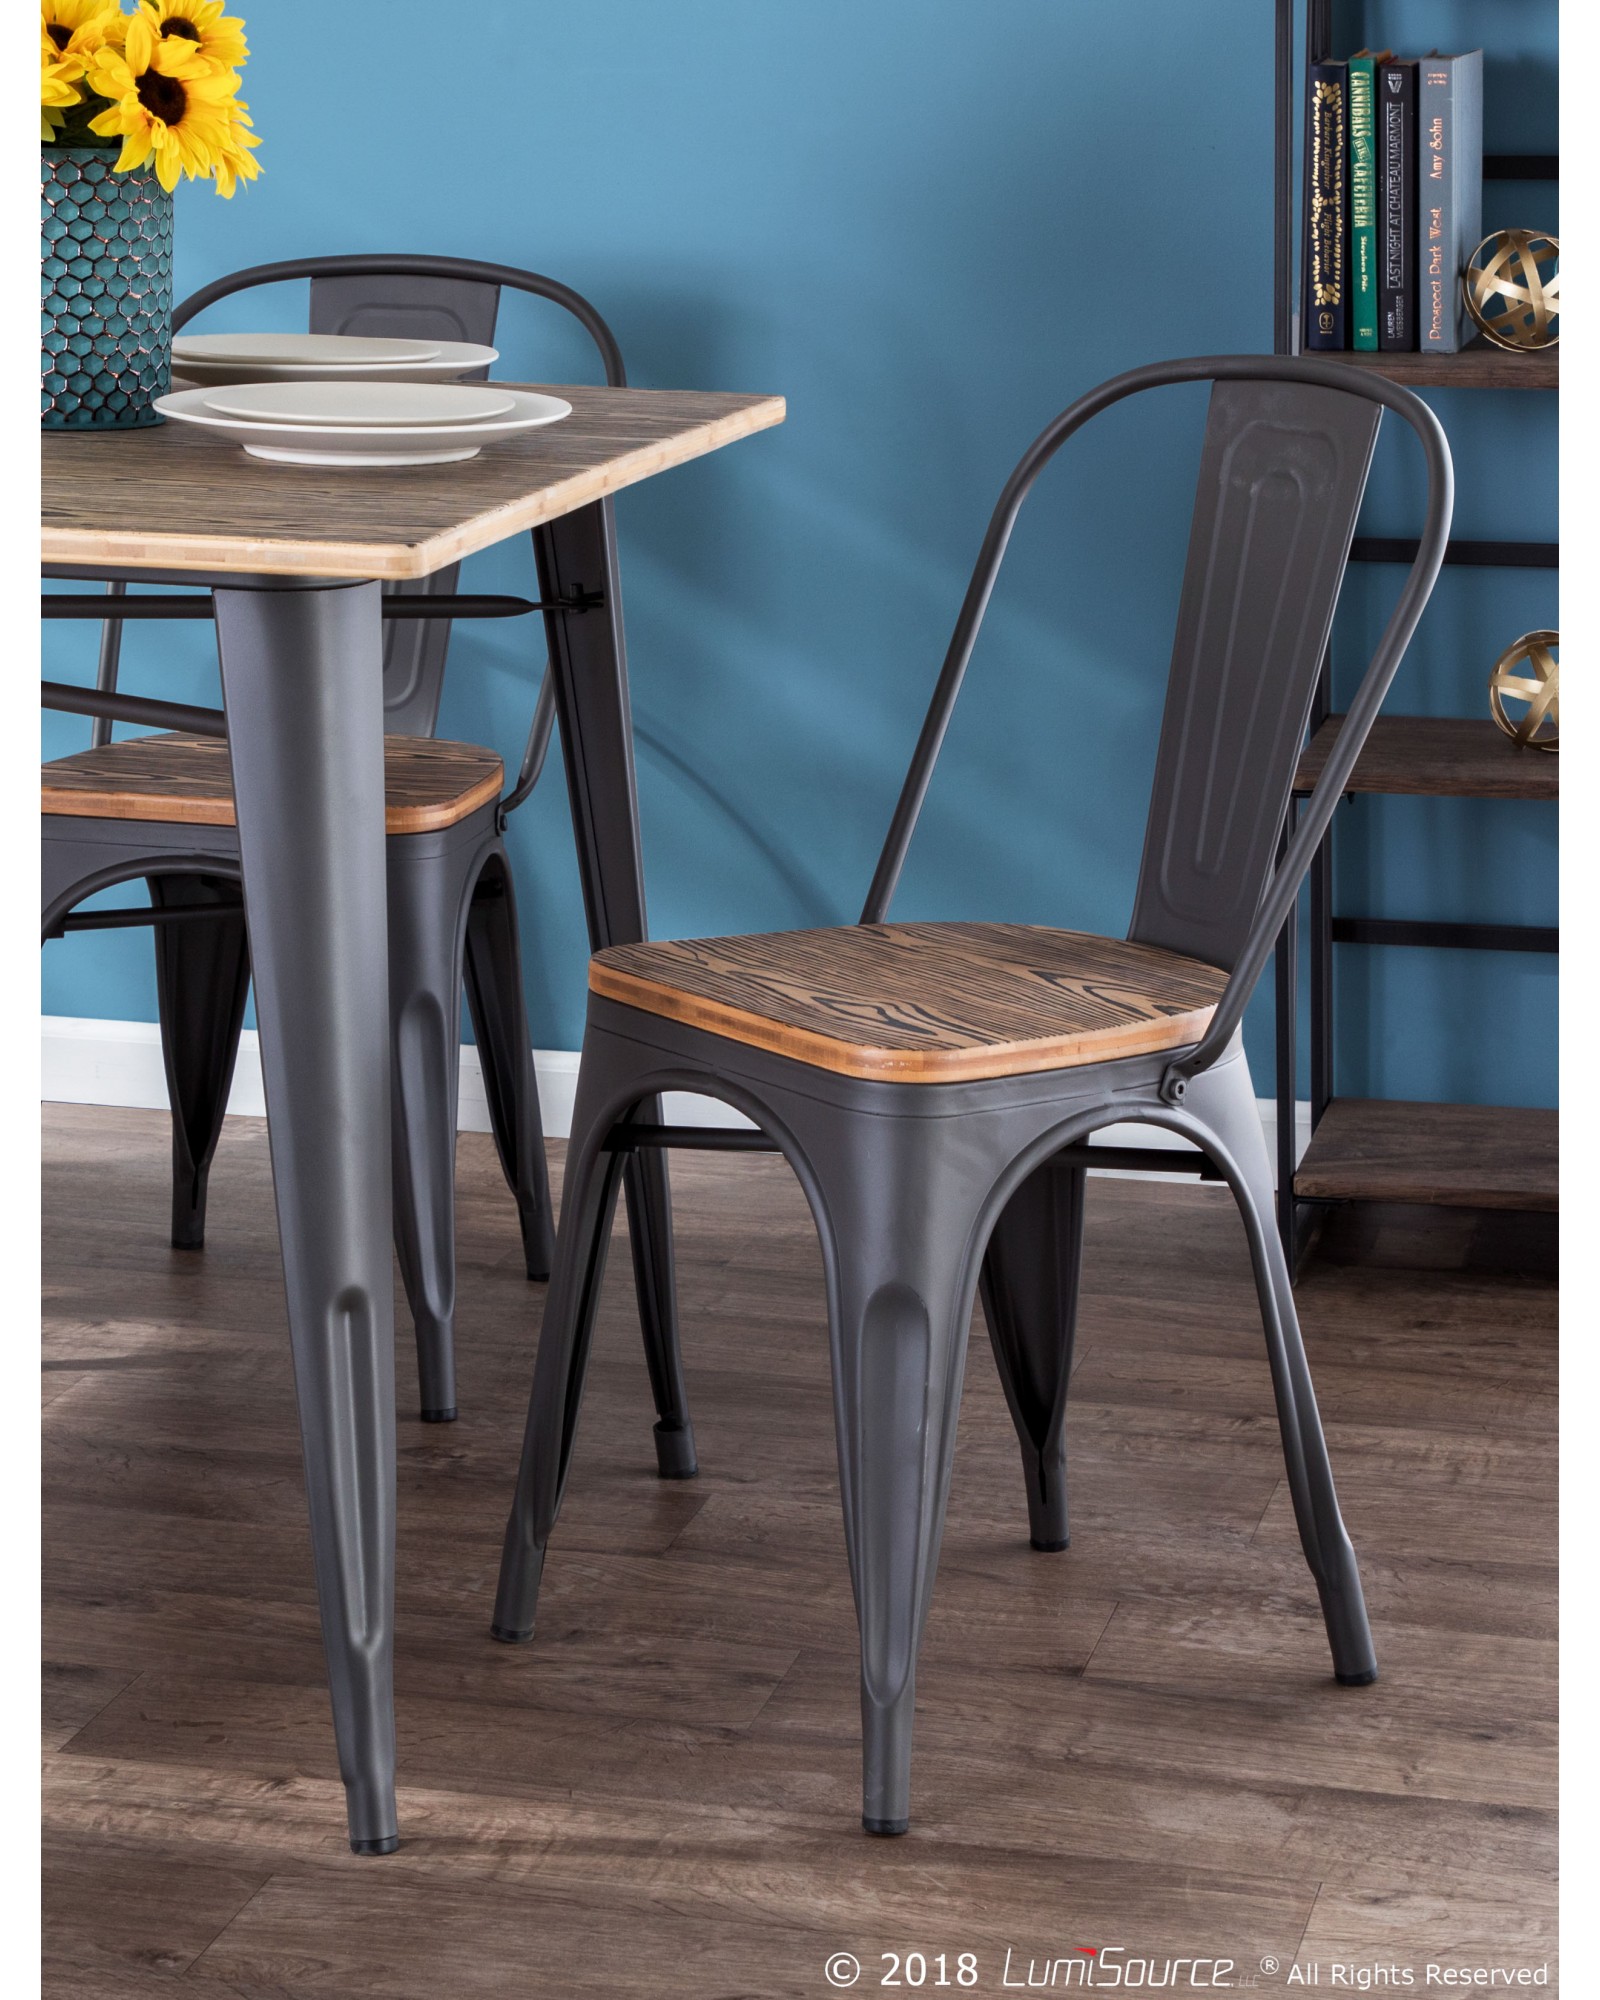 Oregon Industrial-Farmhouse Stackable Dining Chair in Grey and Brown - Set of 2